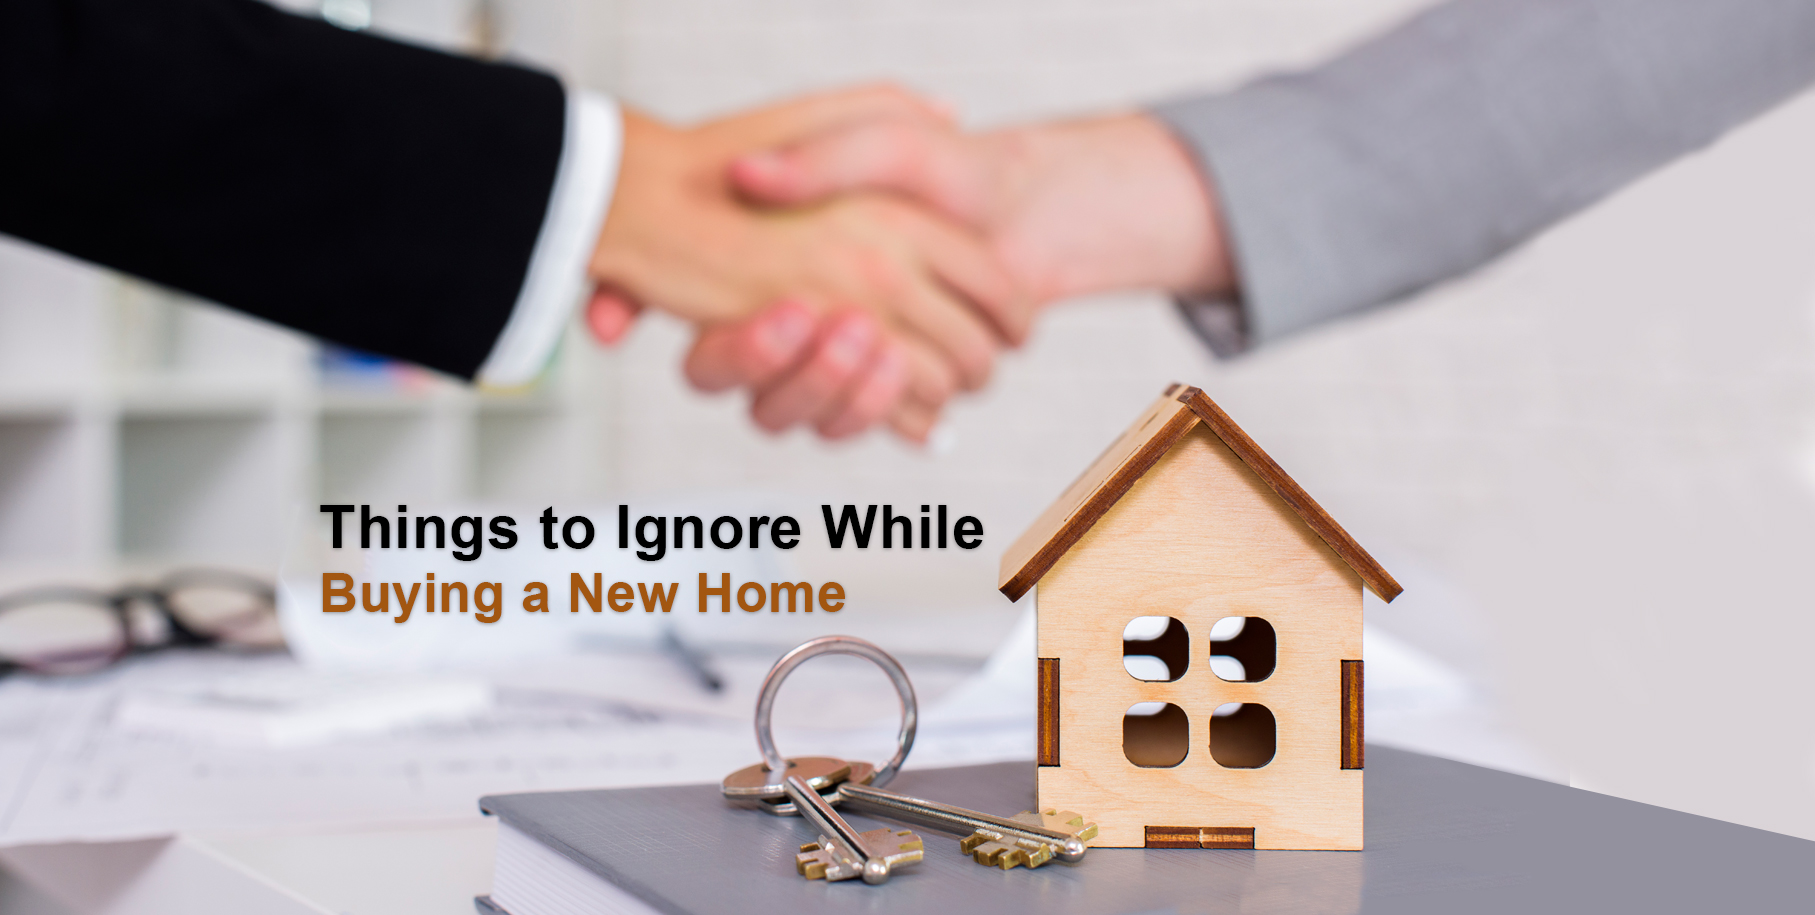 Things to Ignore while Buying a New Home